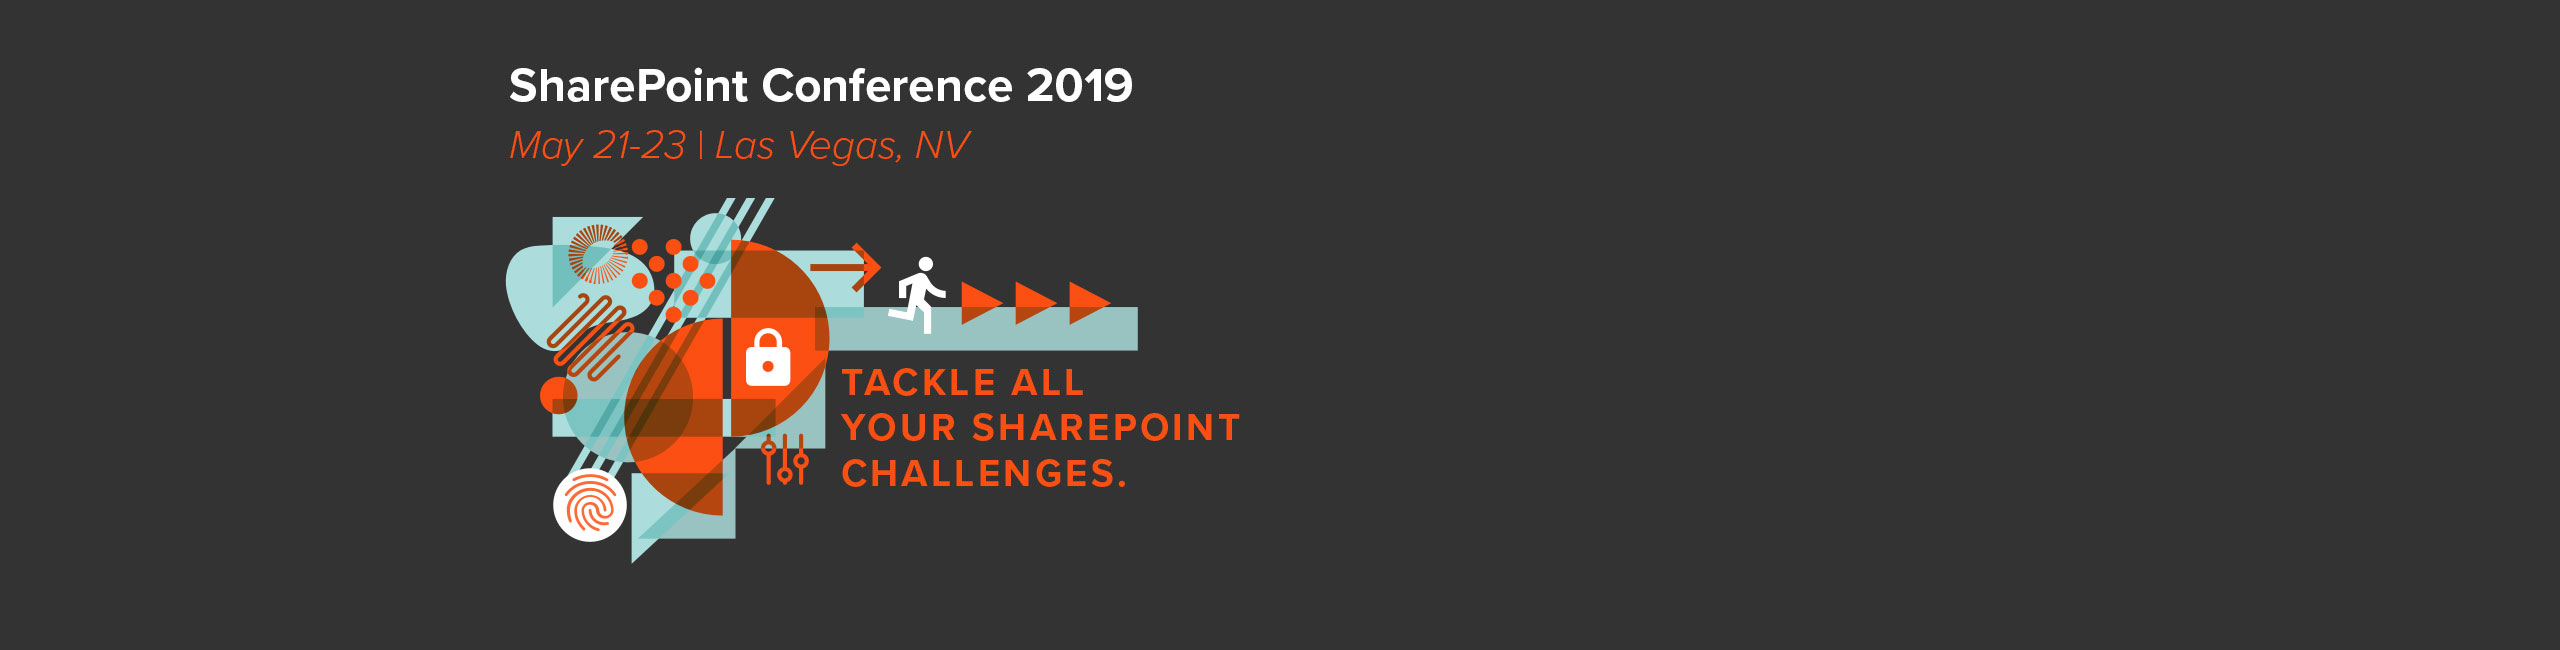 Join us for SharePoint Conference in Las Vegas for world-class training and networking!